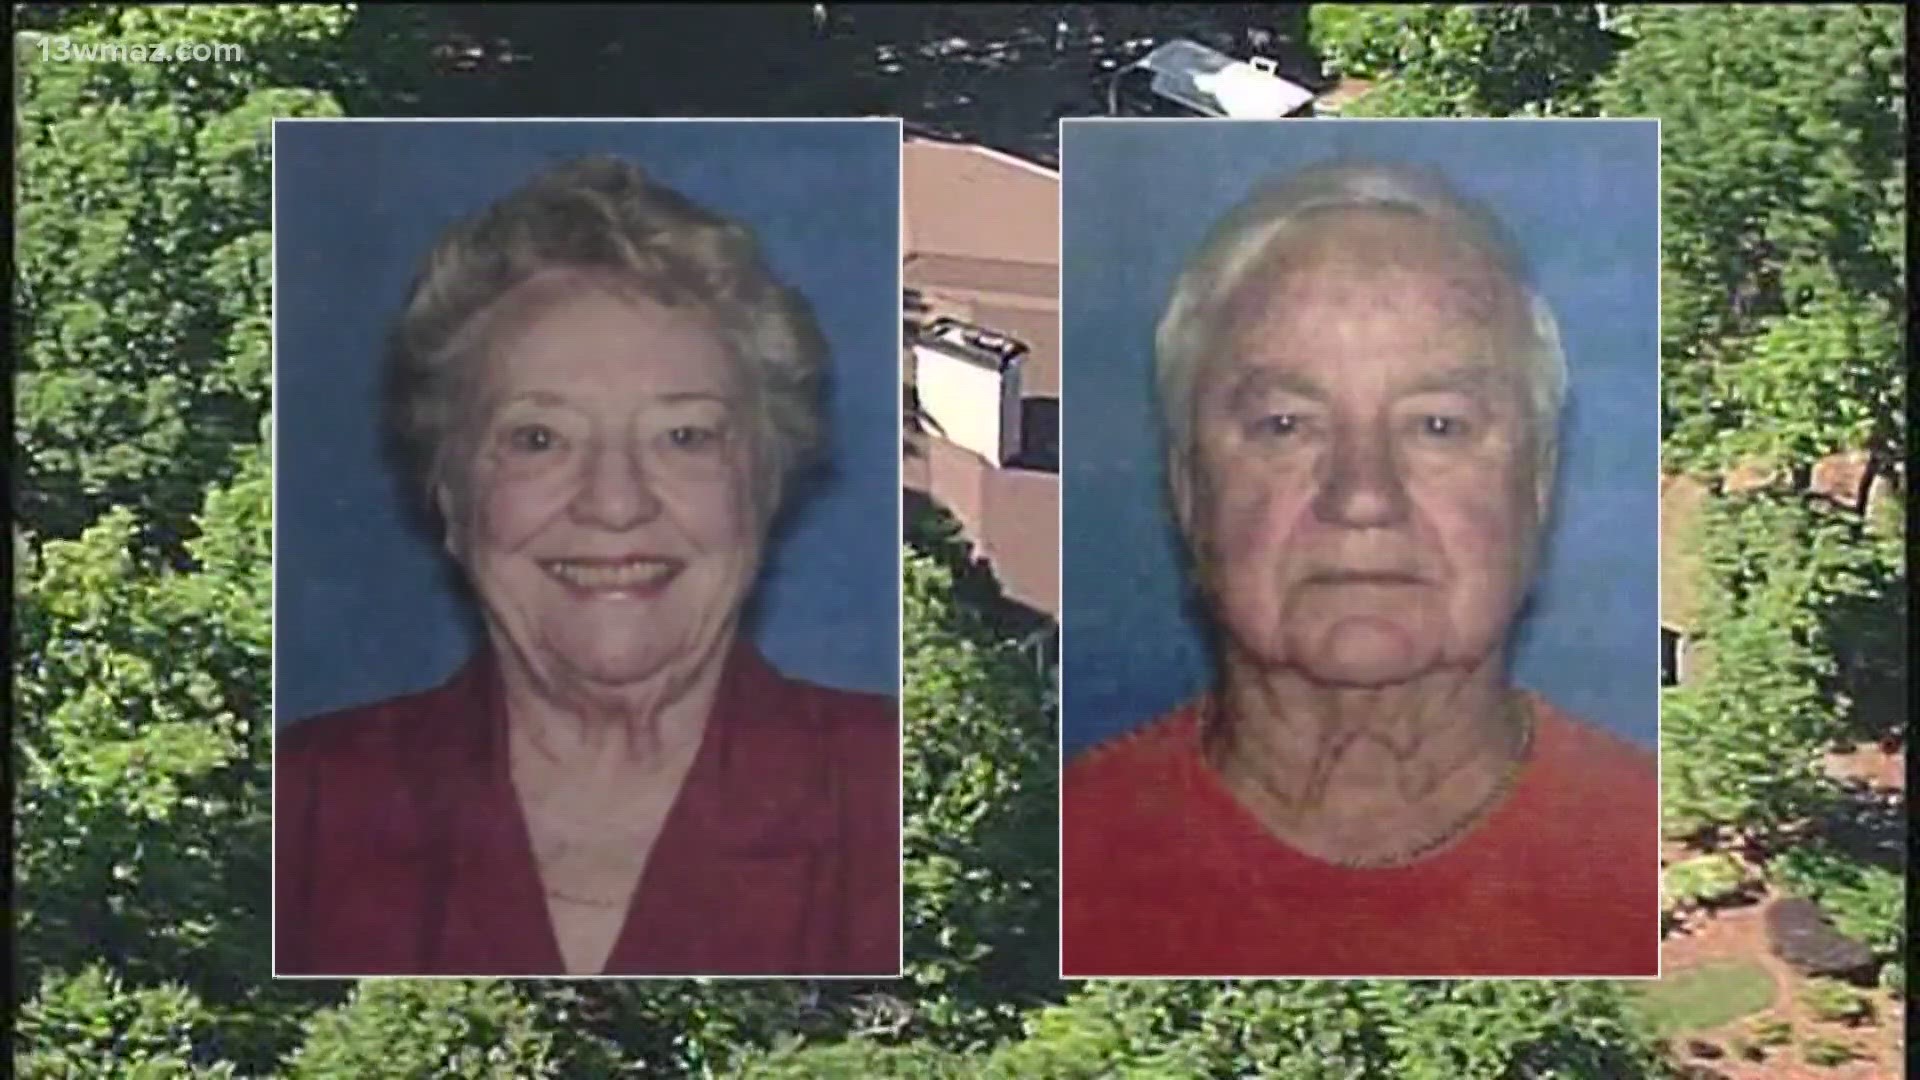 It has been nine years since someone brutally murdered Russell and Shirley Dermond in their Putnam County home.